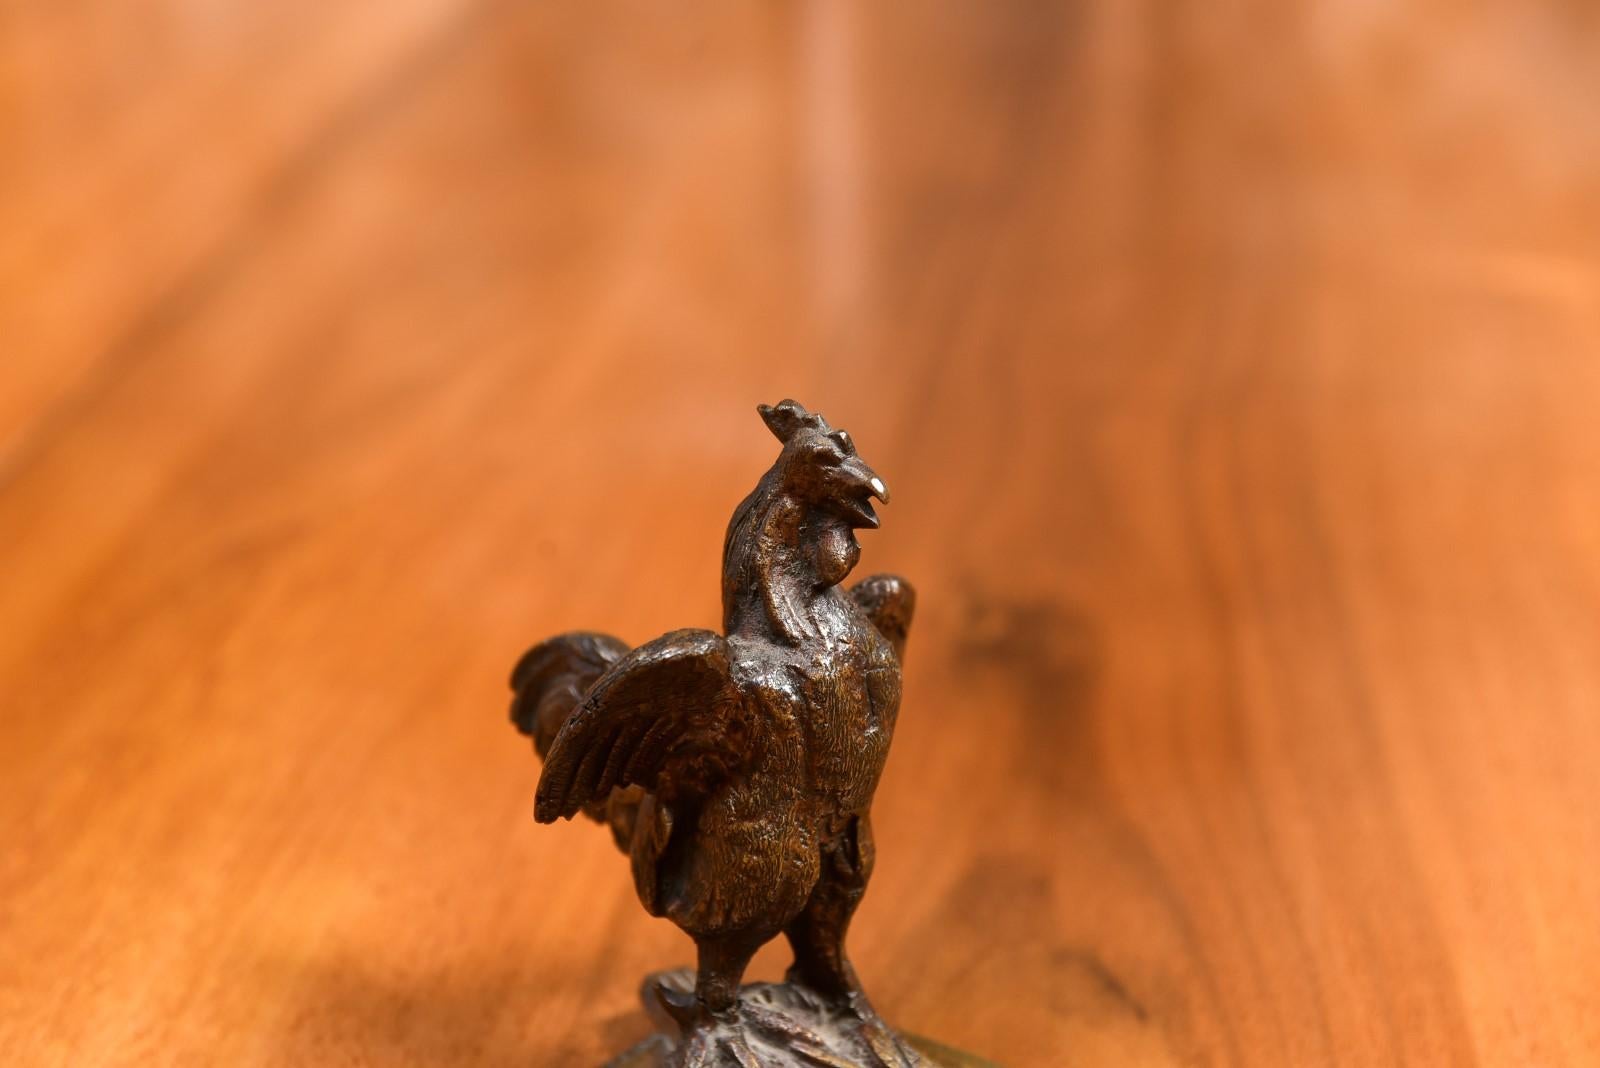 French Cast Bronze 19th Century Rooster Sculpture with Wings Extended Backwards For Sale 8